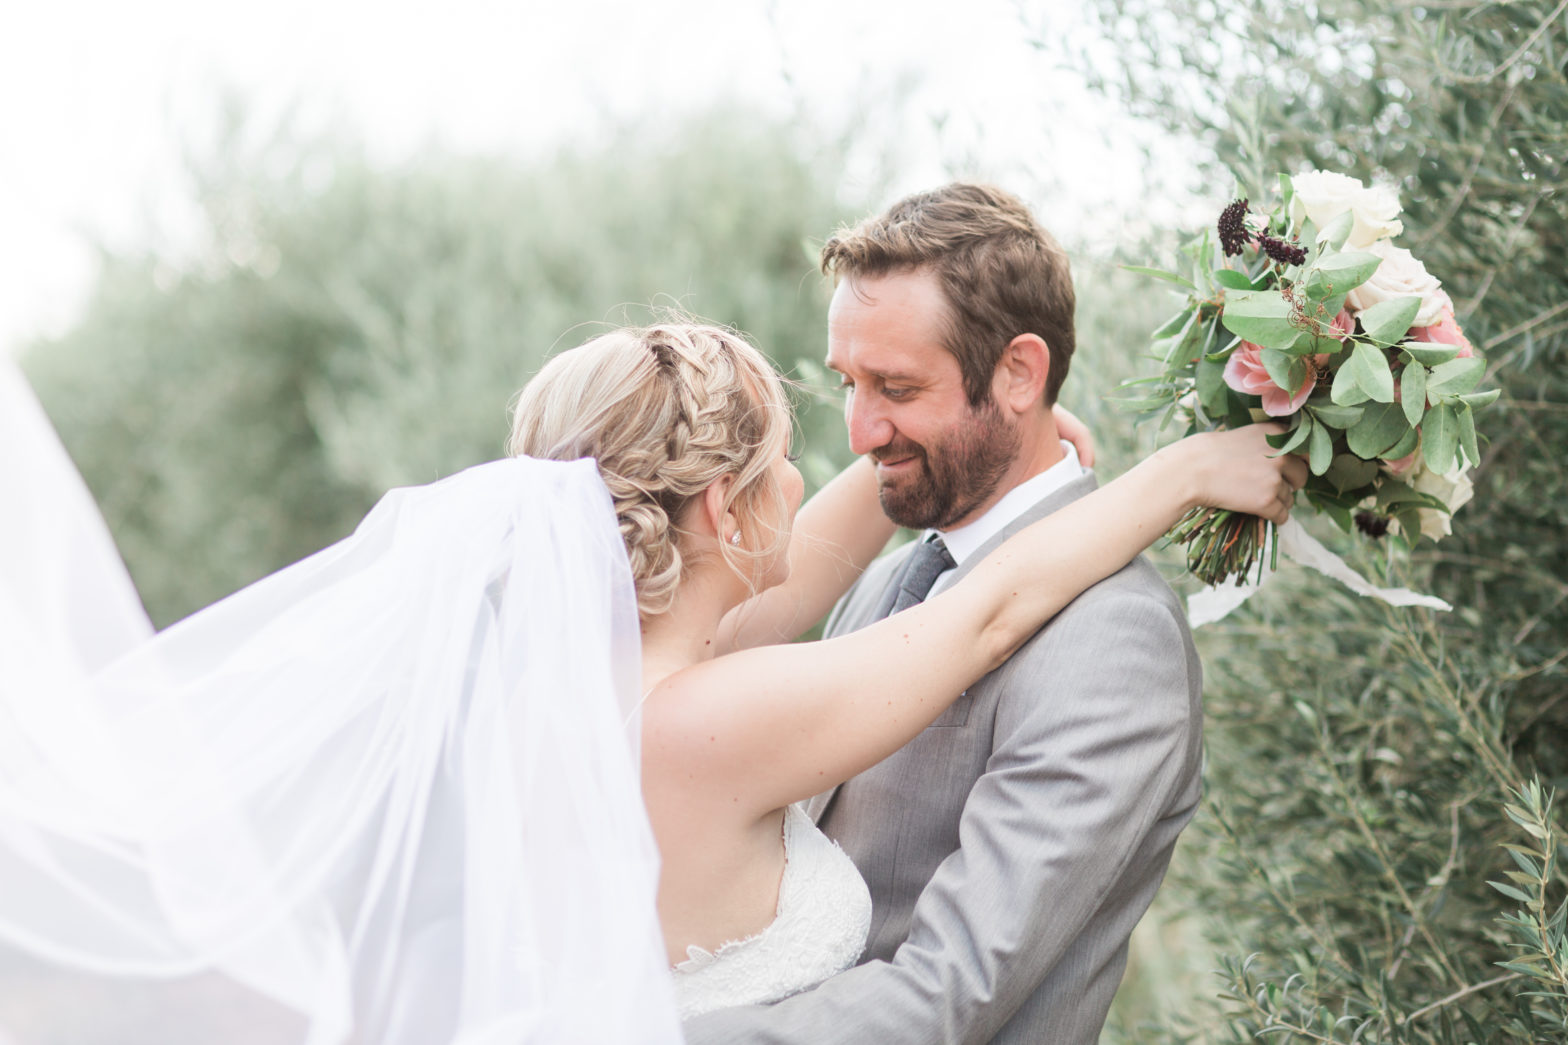 Queen Creek Olive Mill Wedding Photography by Kaci Lou Photography for Lauren and Dave 10-20-2018-5818